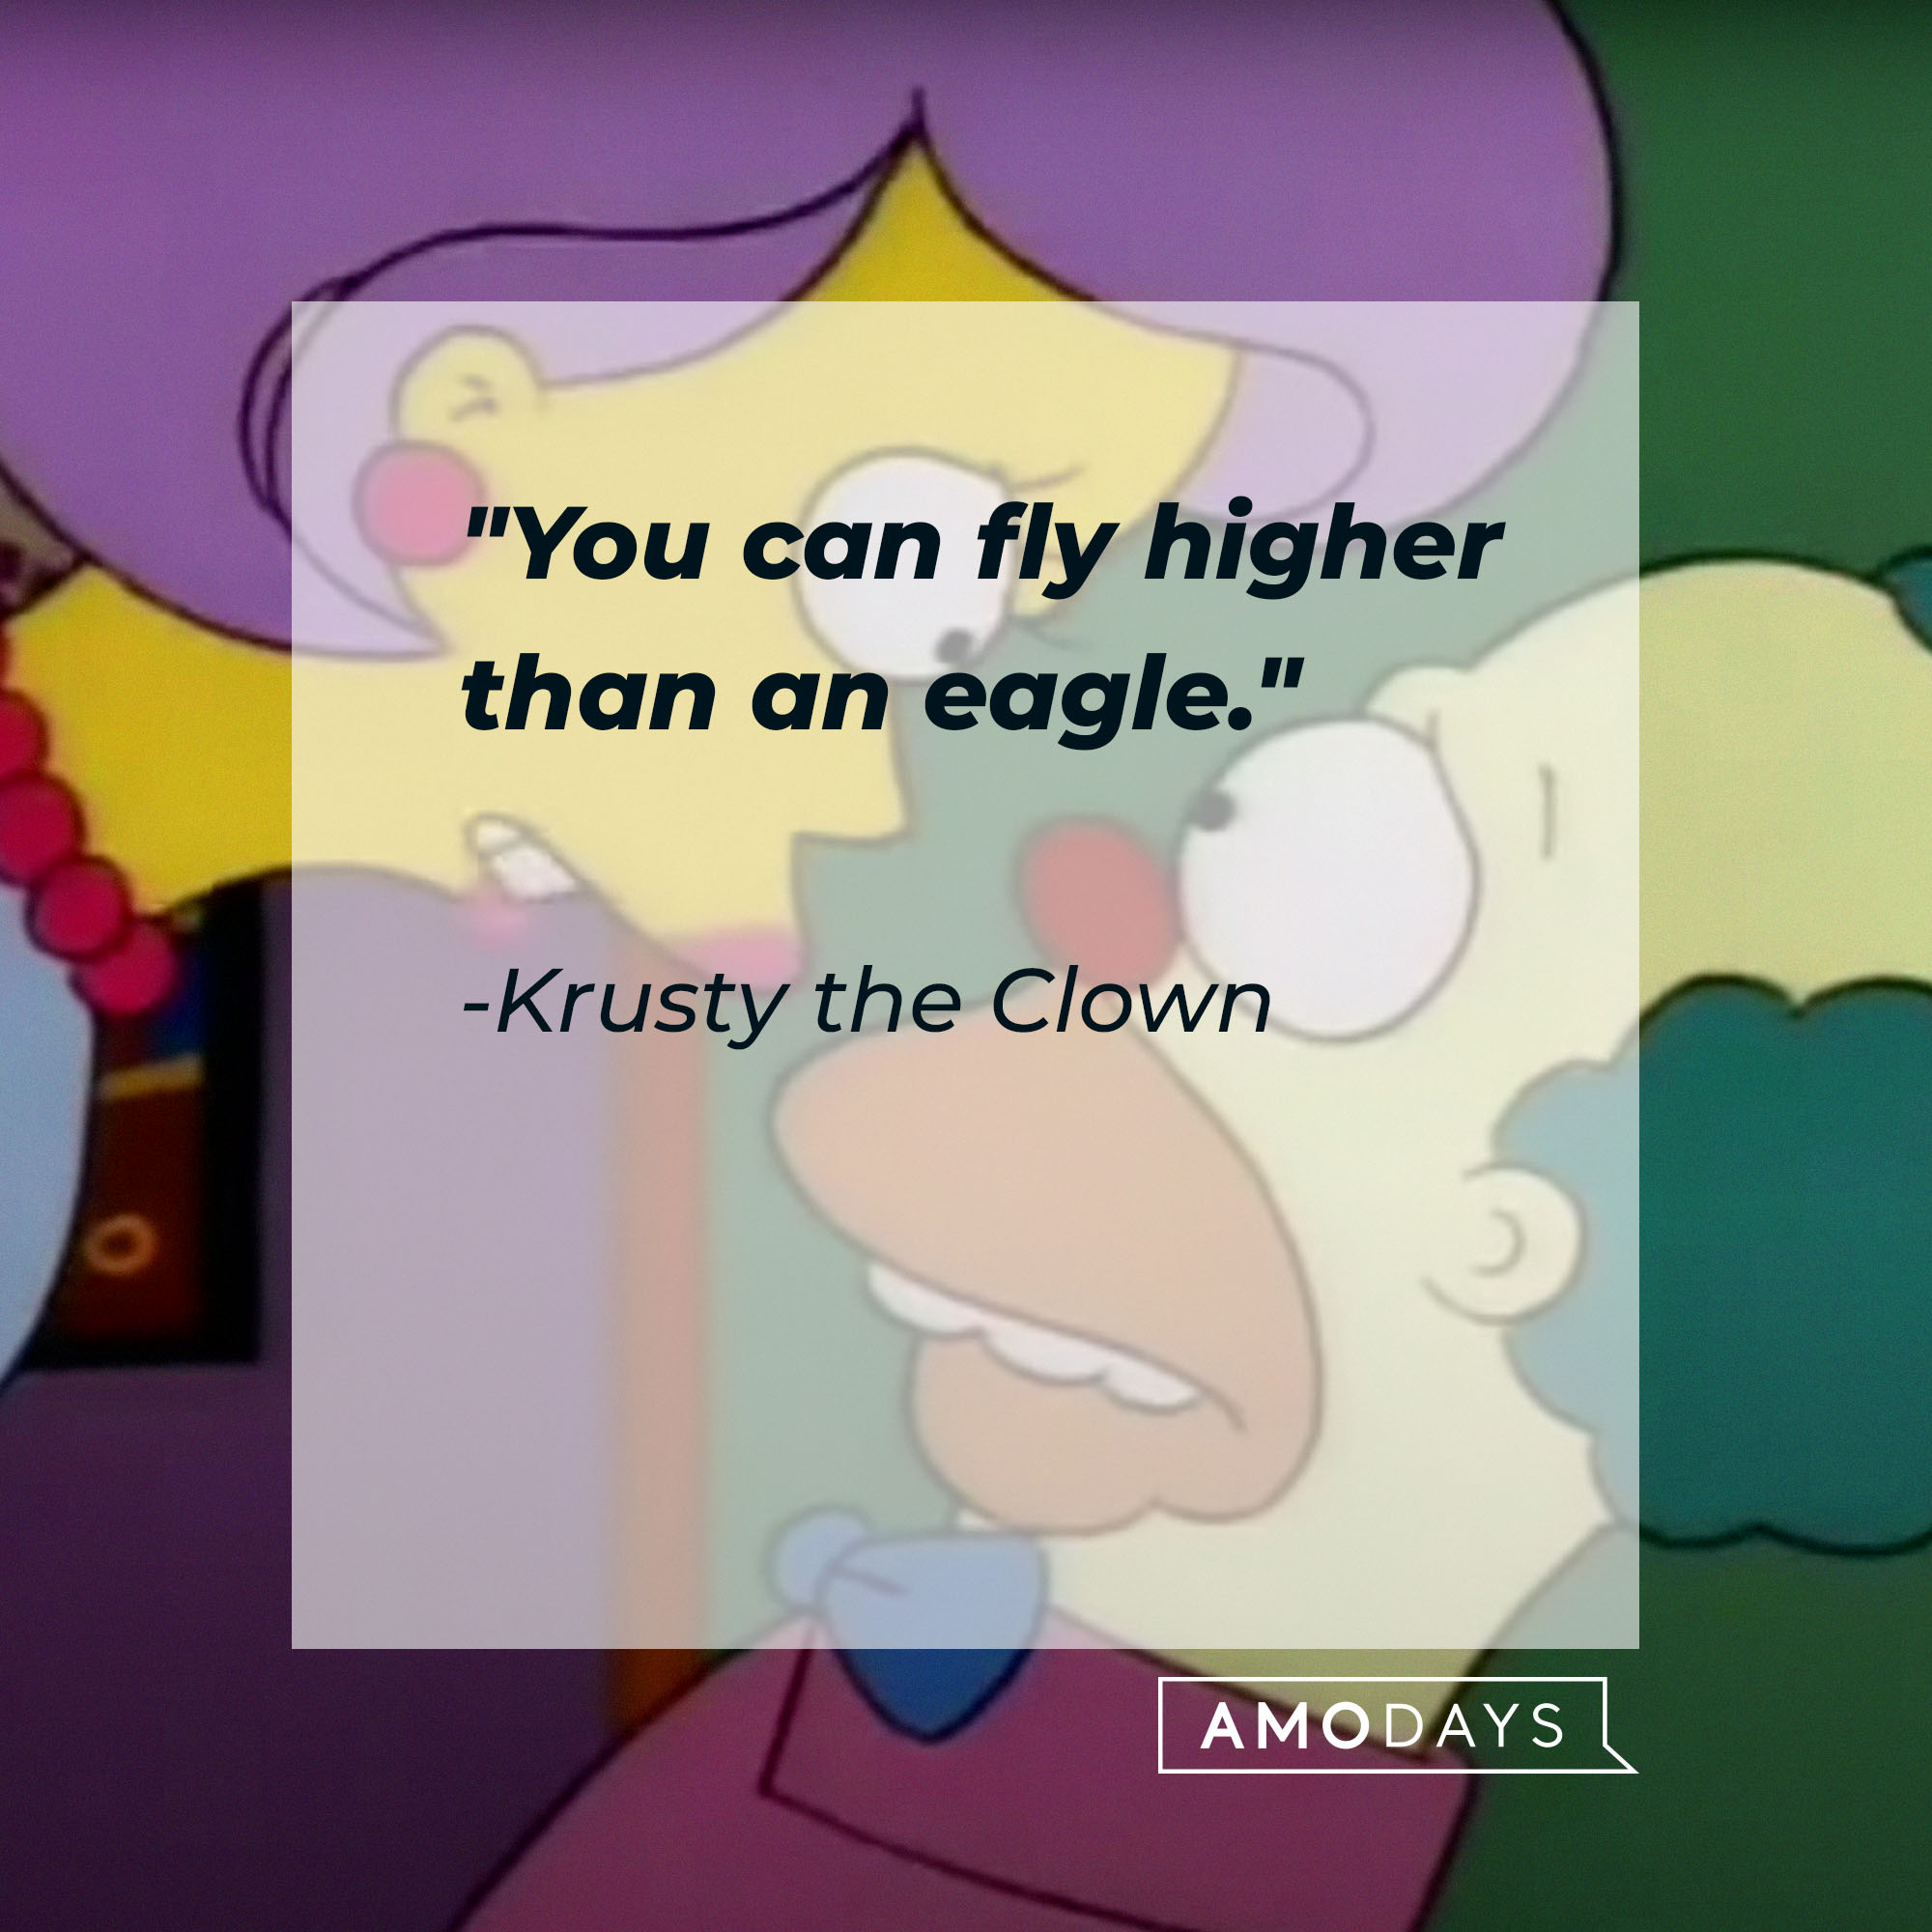 Krusty the Clown's quote: "You can fly higher than an eagle" | Source: Facebook.com/TheSimpsons